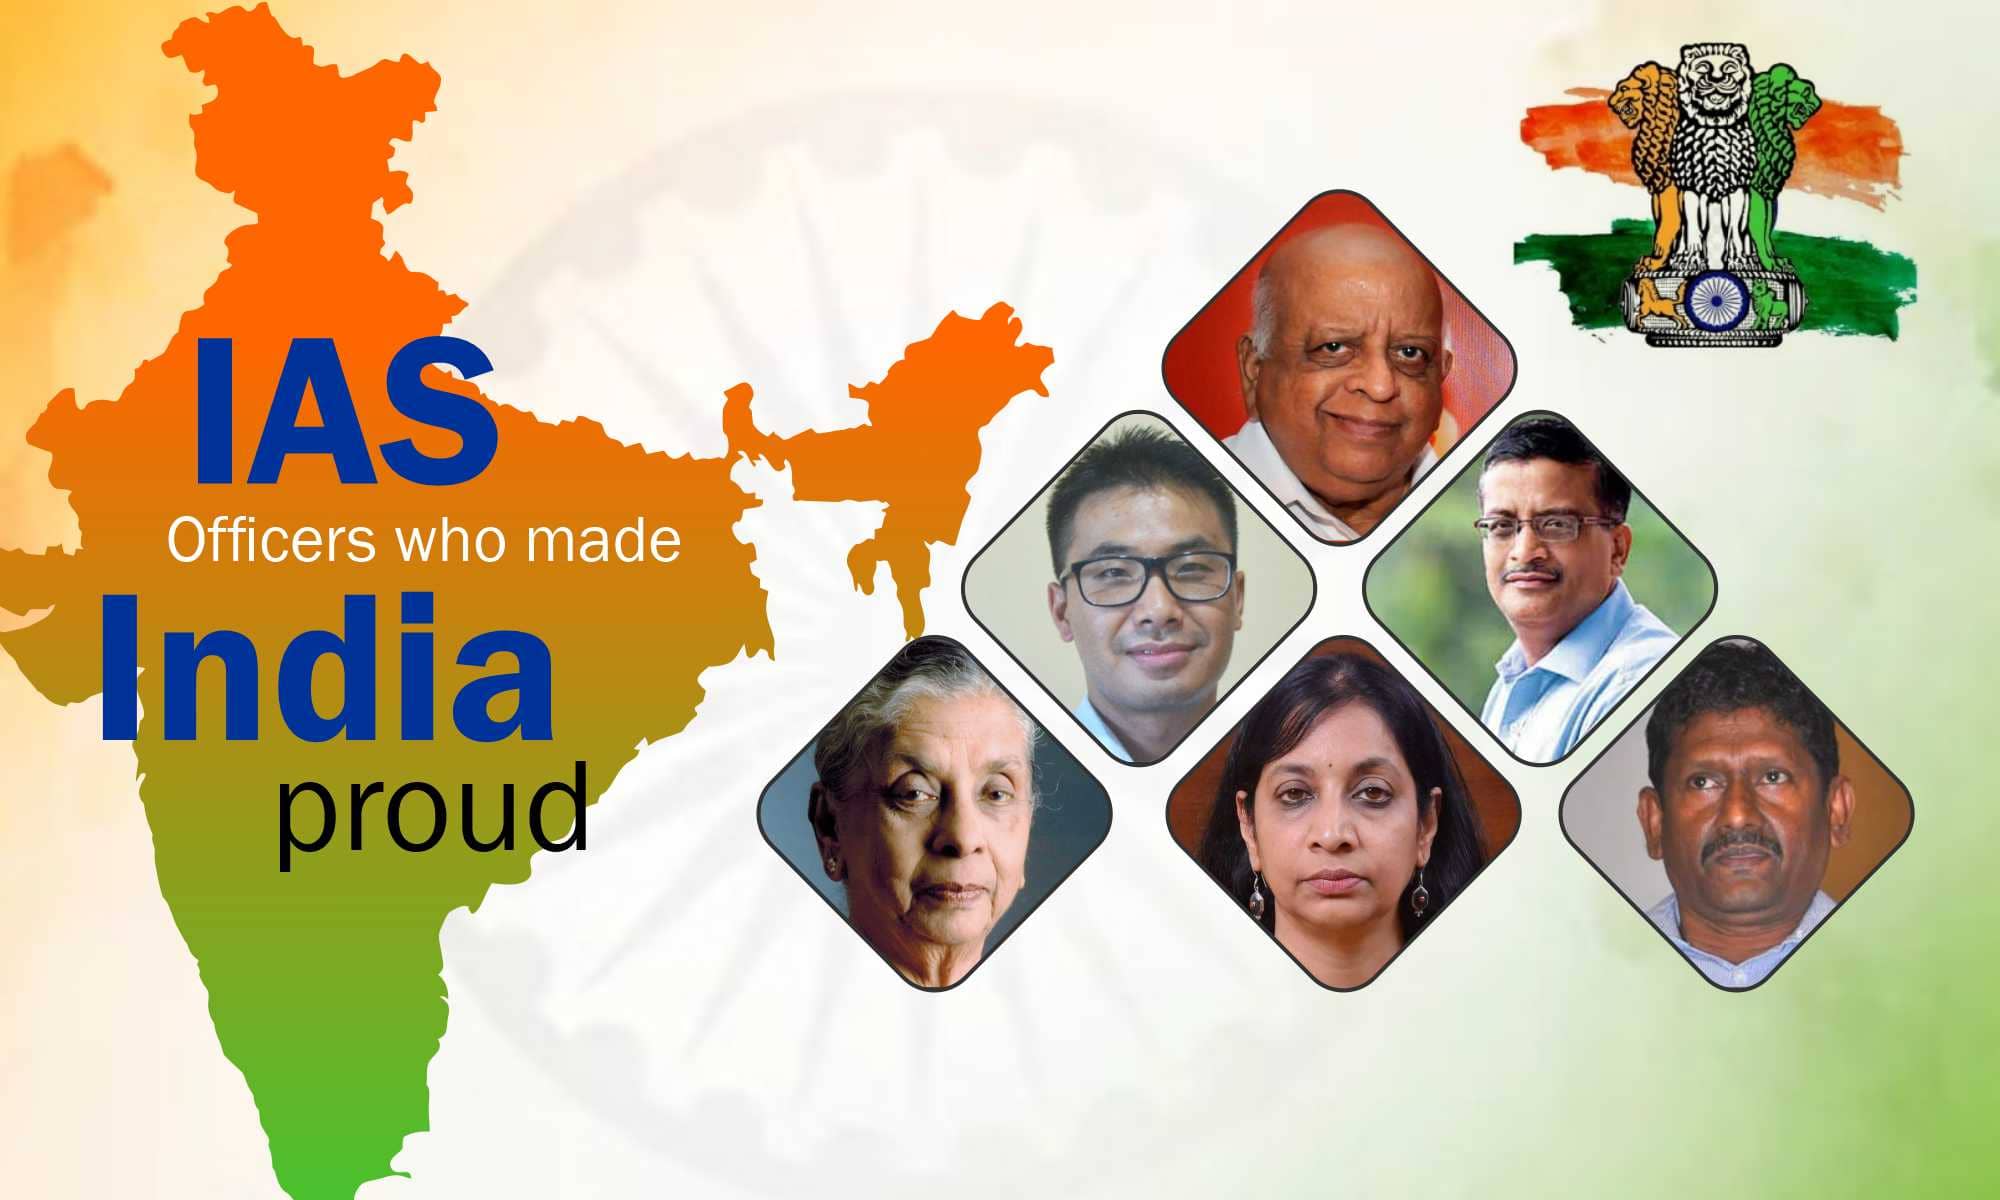 IAS OFFICERS WHO MADE INDIA PROUD